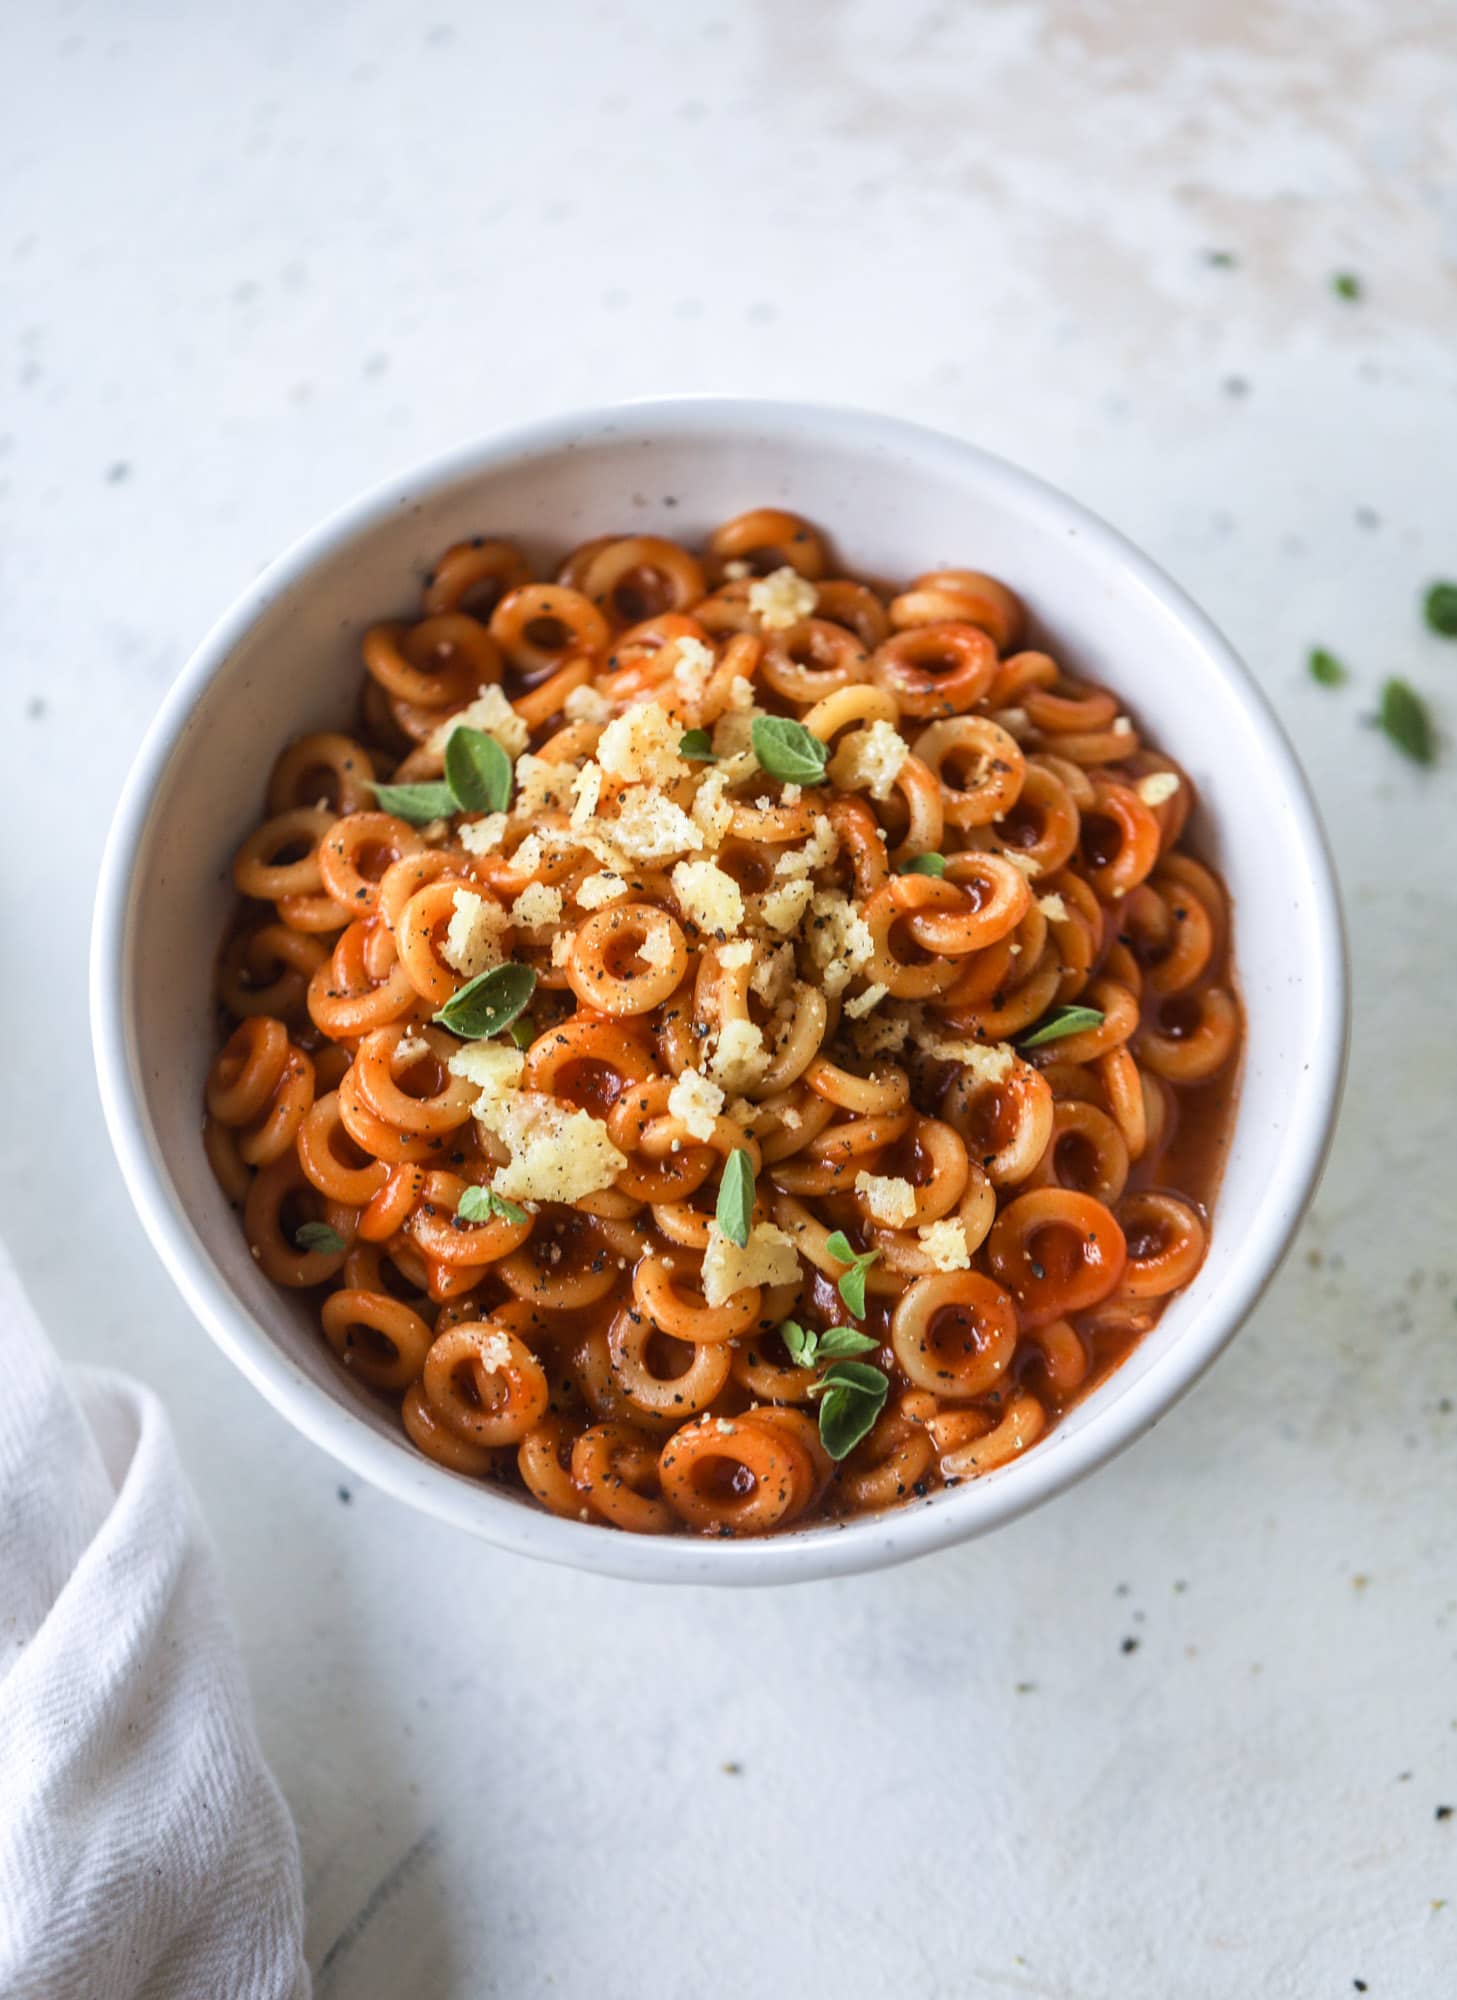 These homemade spaghettios are the ultimate comfort food! They come together in less than 30 minutes, are super easy and flavorful and topped with crispy crunchy manchego cheese that takes the taste over the top! I howsweeteats.com #homemade #spaghettios